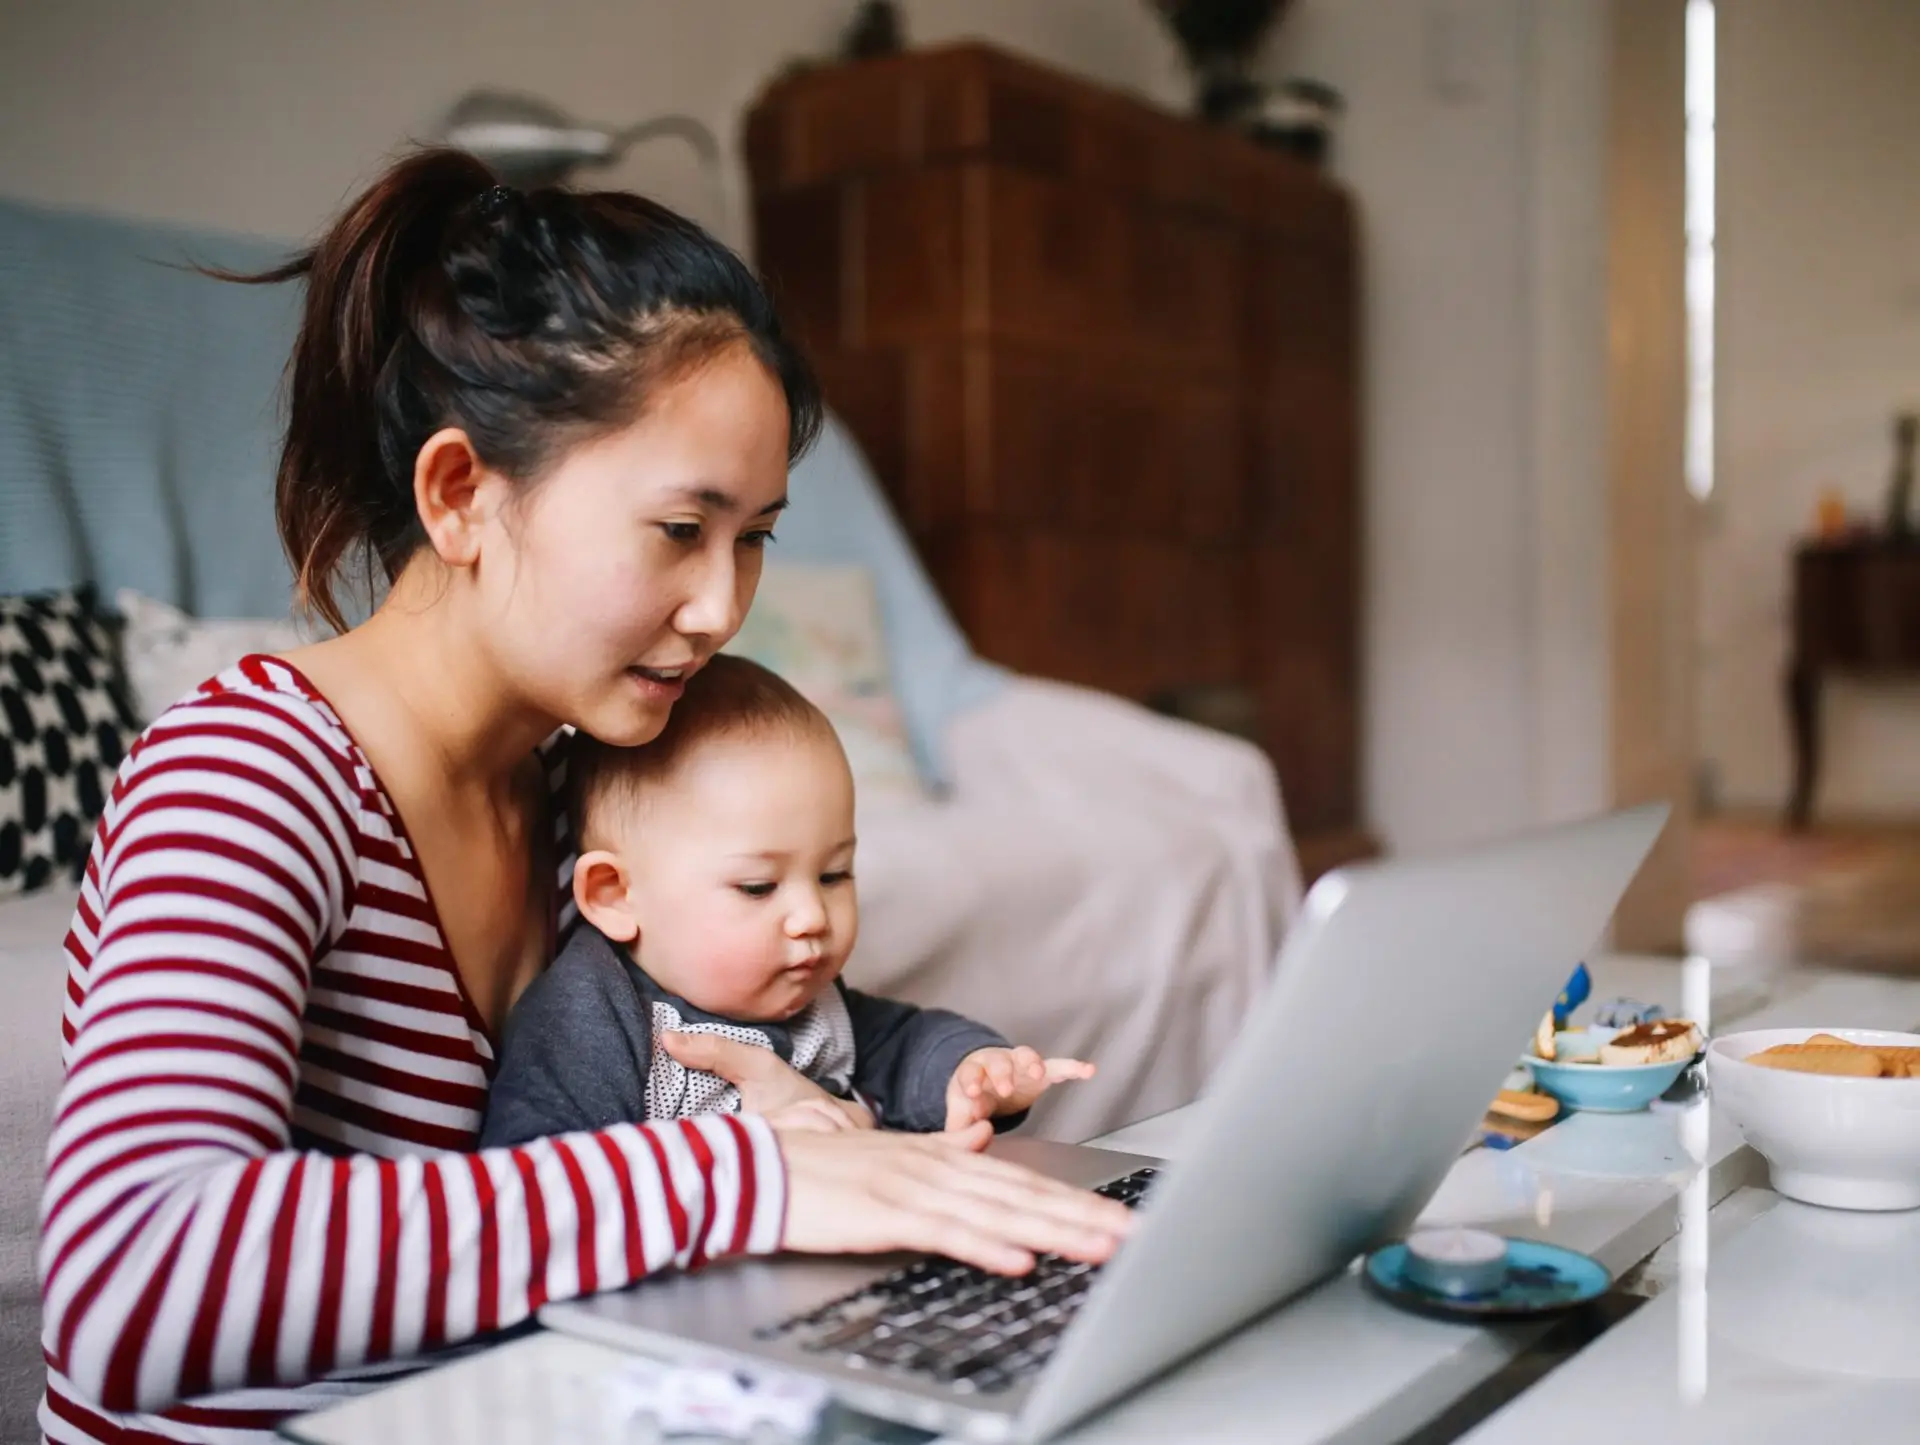 A woman holds her baby on her lap as she works on a laptop